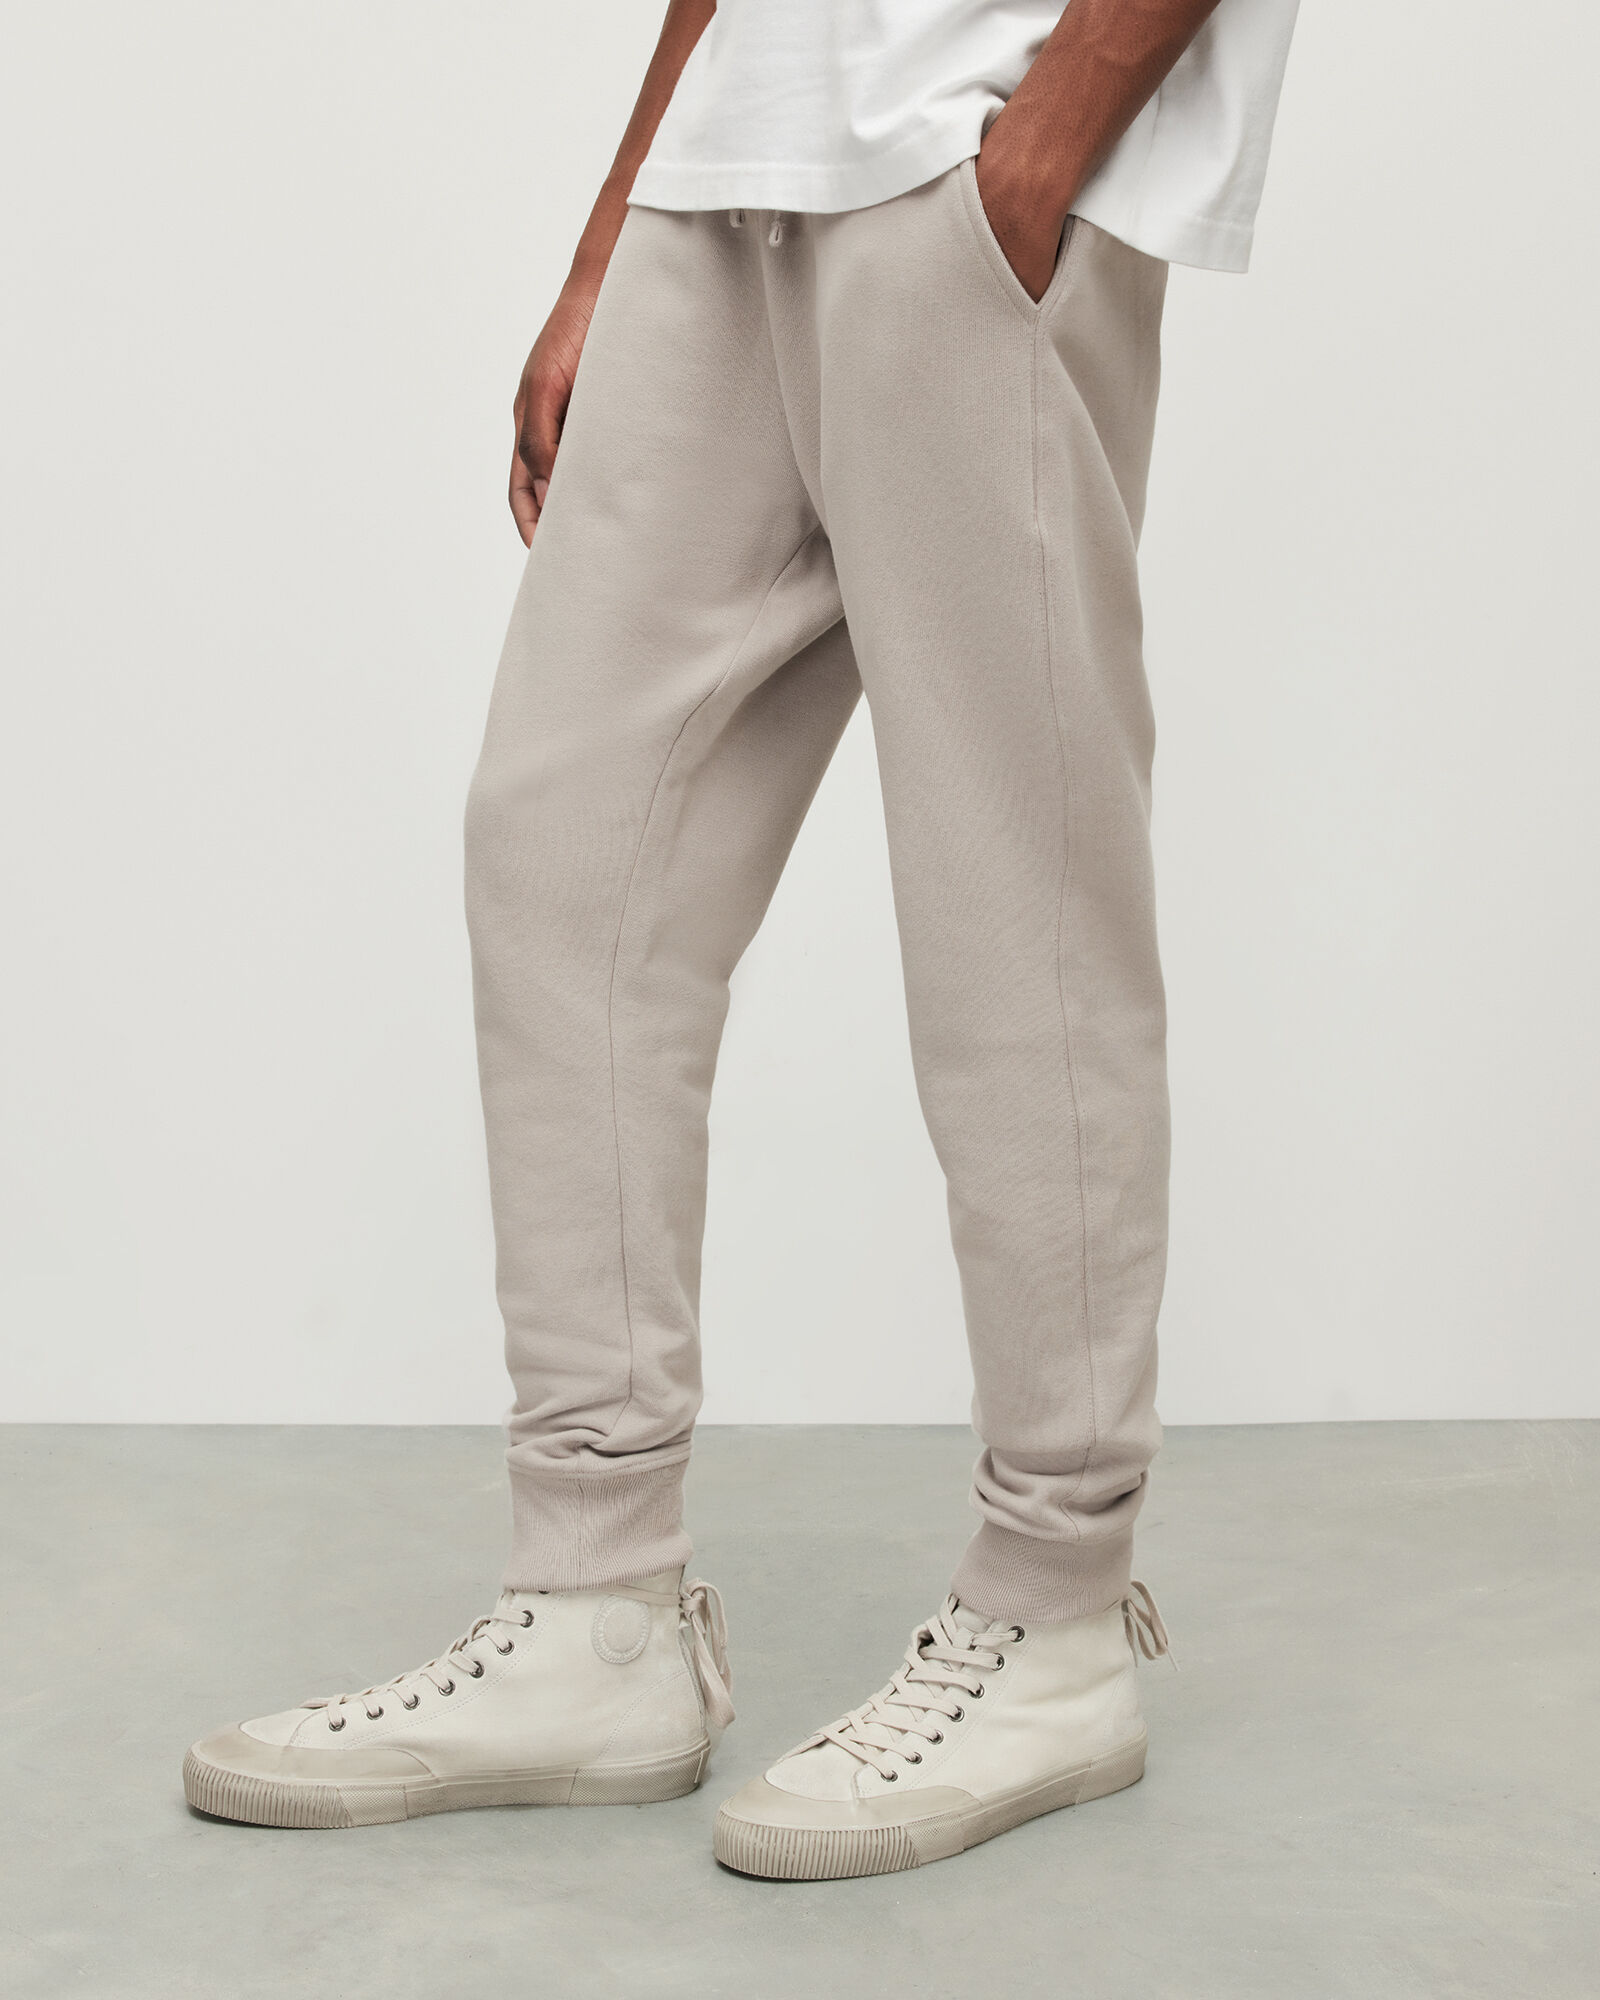 Raven Cuffed Slim Sweatpants FROSTED TAUPE | ALLSAINTS